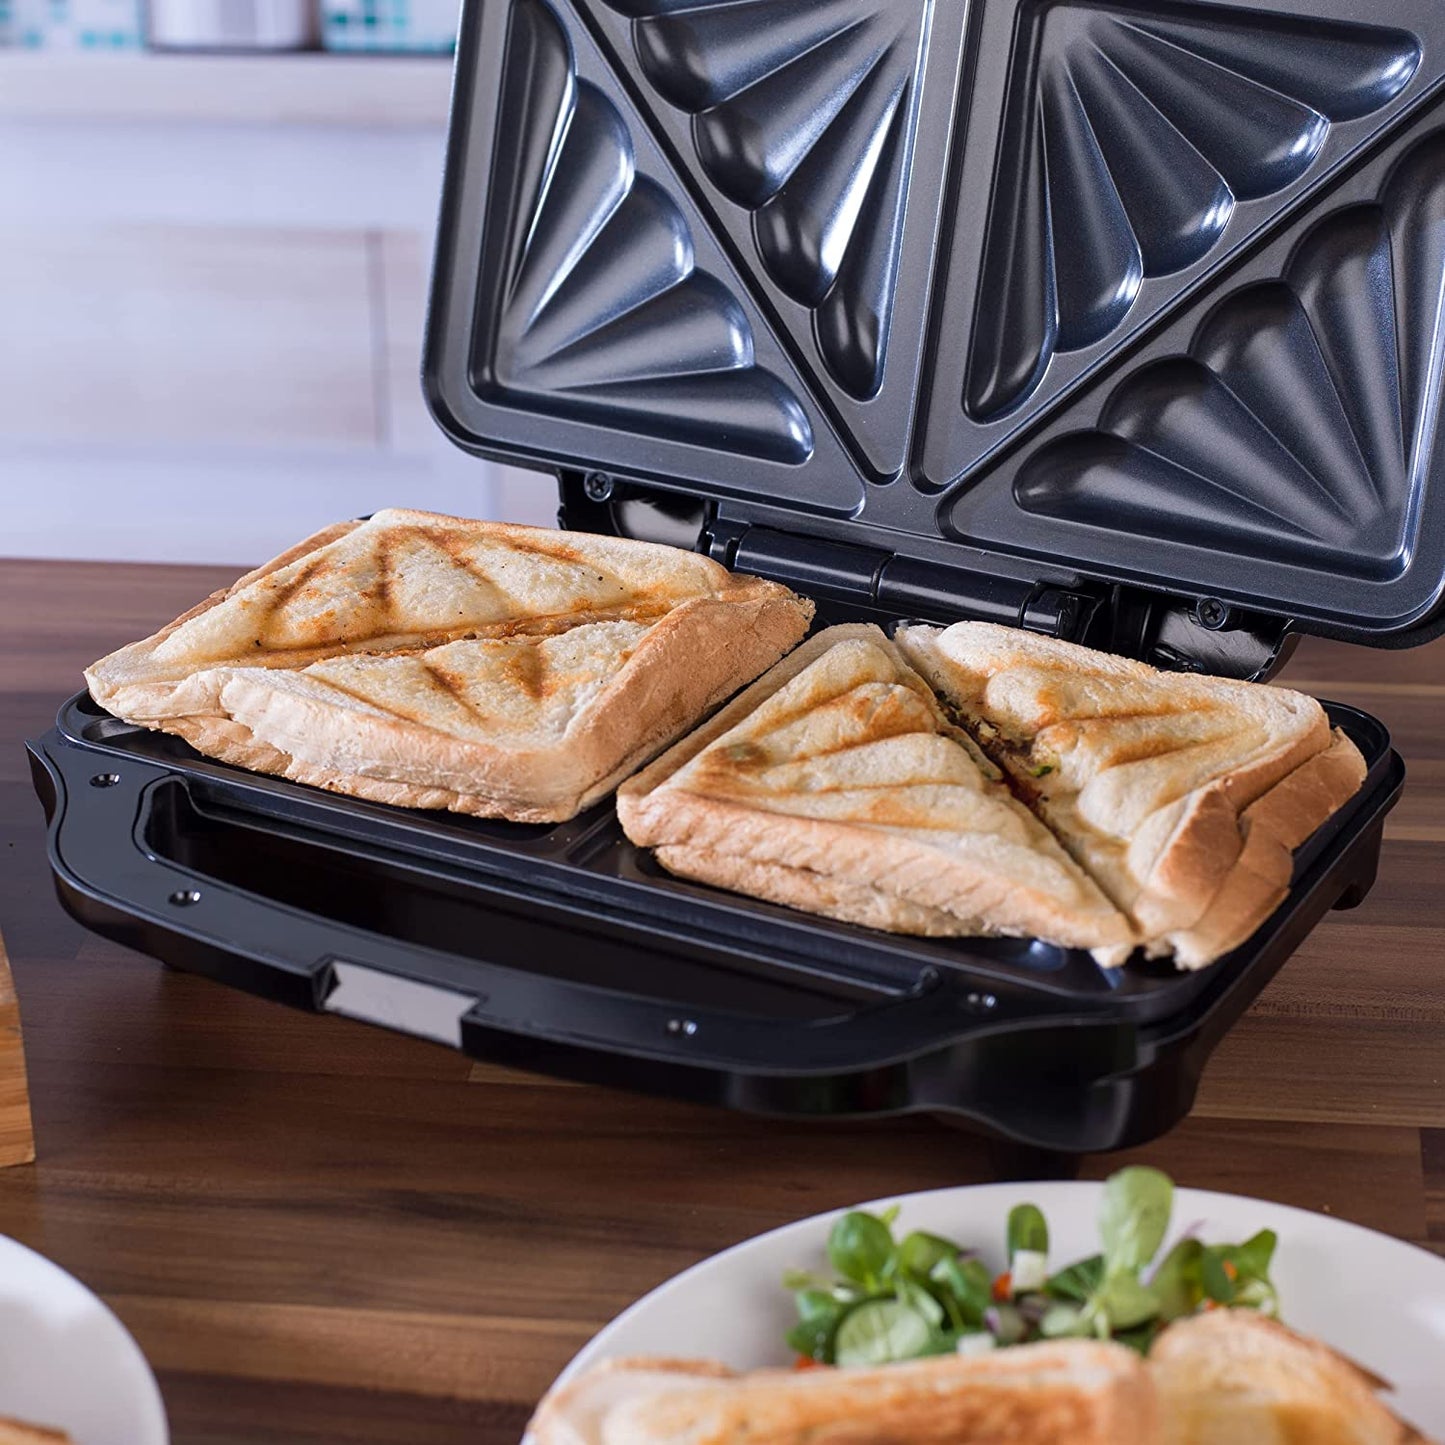 EK2017T Deep Fill Toastie Maker – XL Sandwich Toaster Press with Non-Stick Hot Plates, for 2 Toasted Sandwiches, 4 Slice, Easy Clean, Cool Touch Handles, Automatic Temperature Control, 900 W